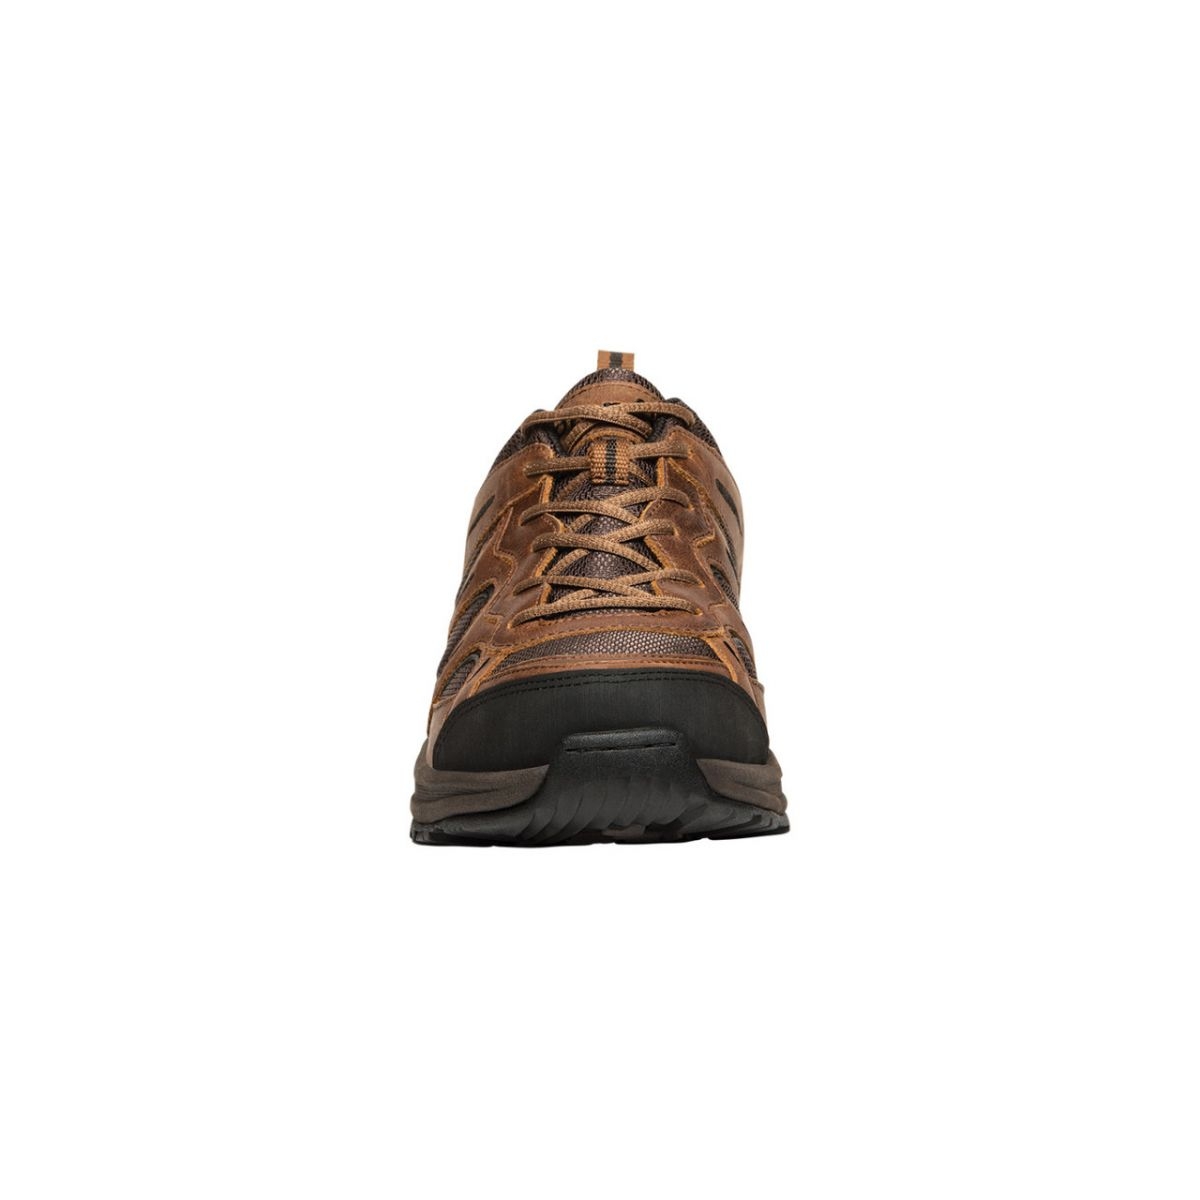 Propet Men's Connelly Hiking Shoe Brown - M5503BR BROWN - BROWN, 15-D